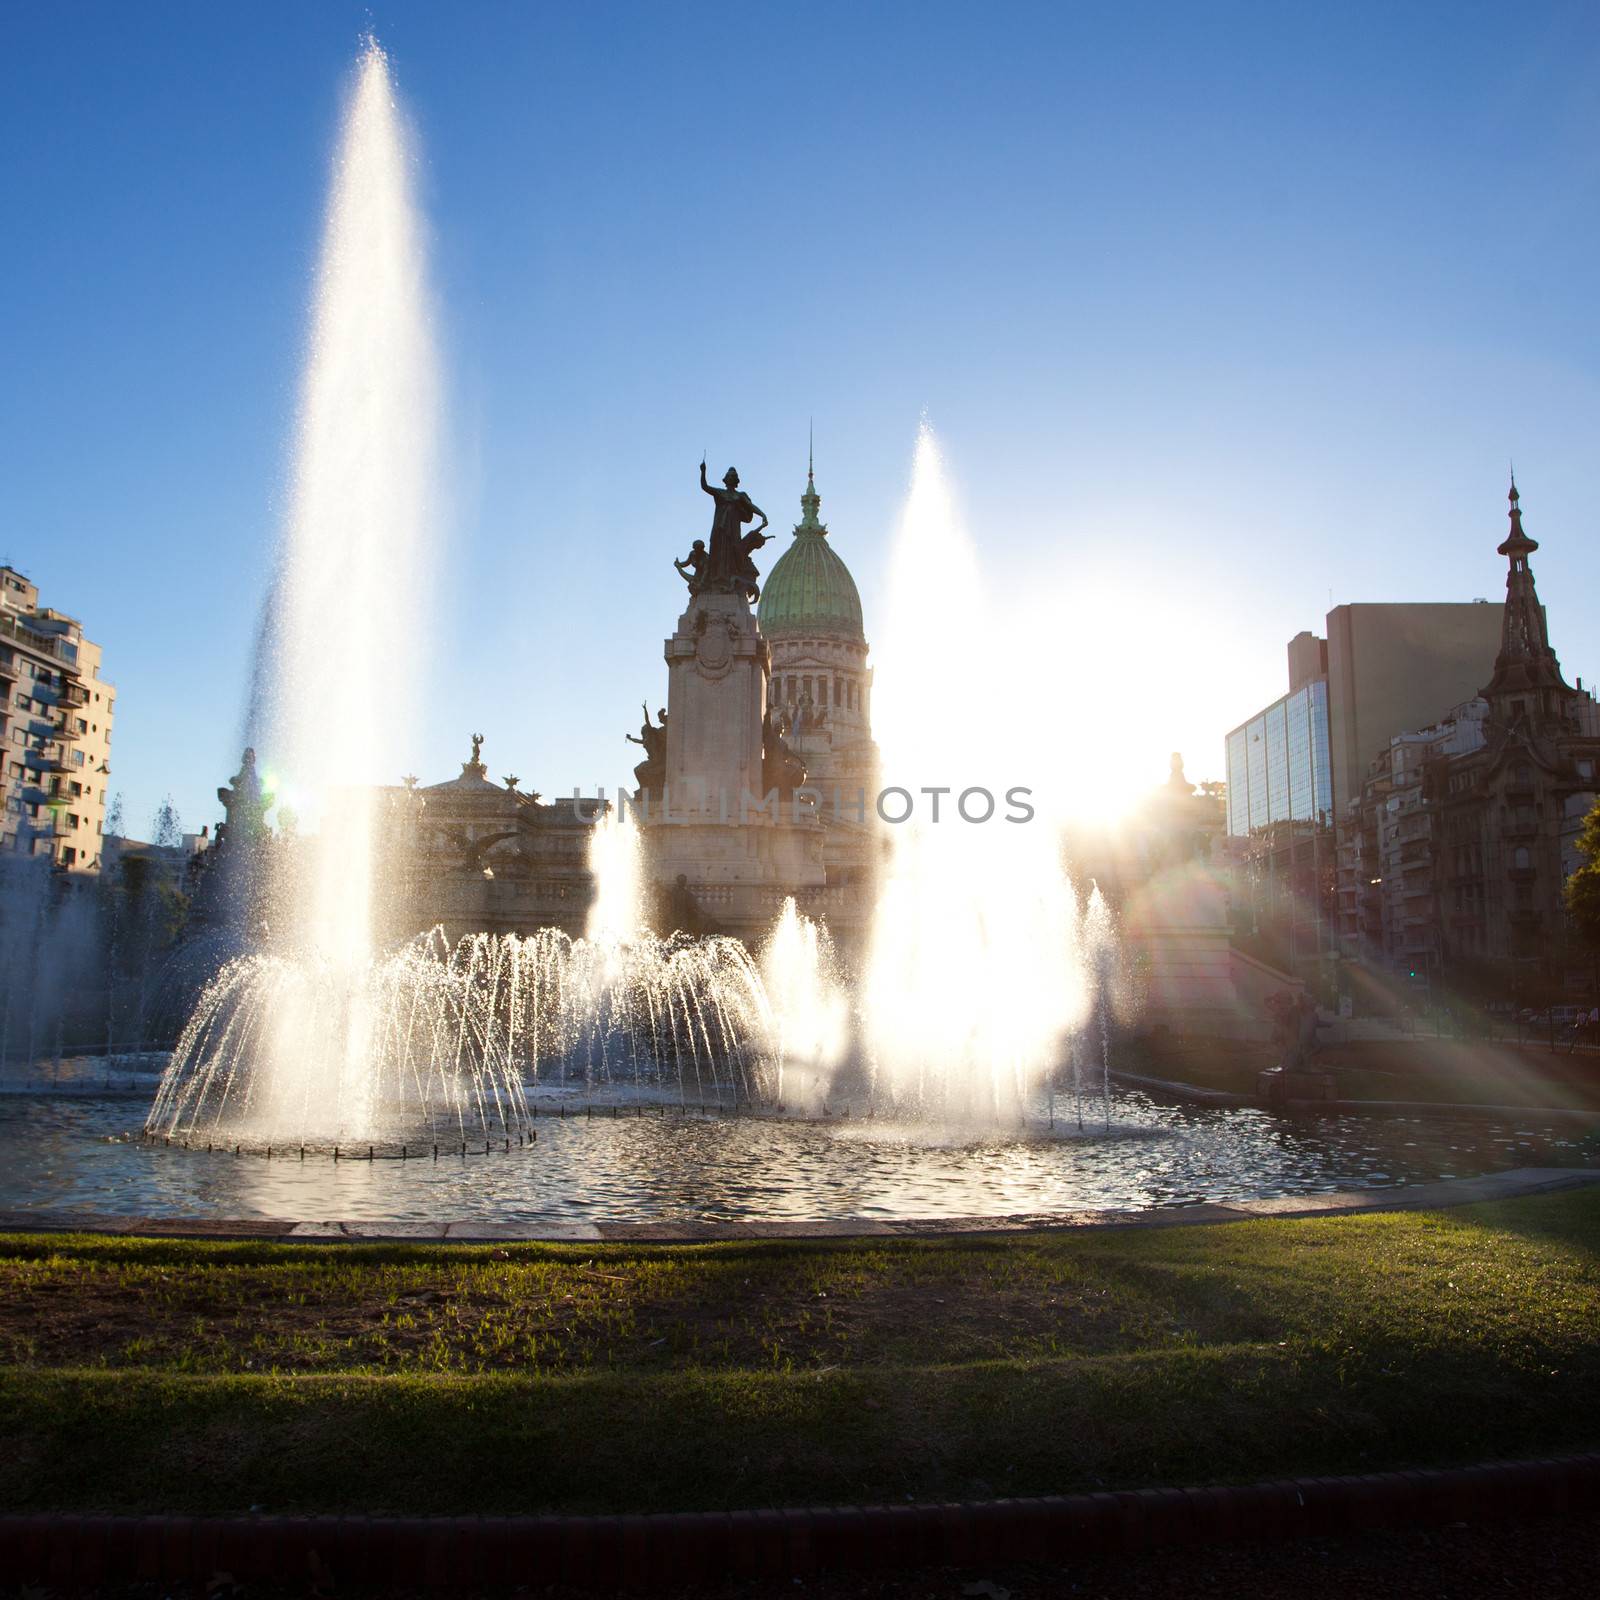 Building of Congress and the fountain in Buenos Aires, Argentina by jannyjus